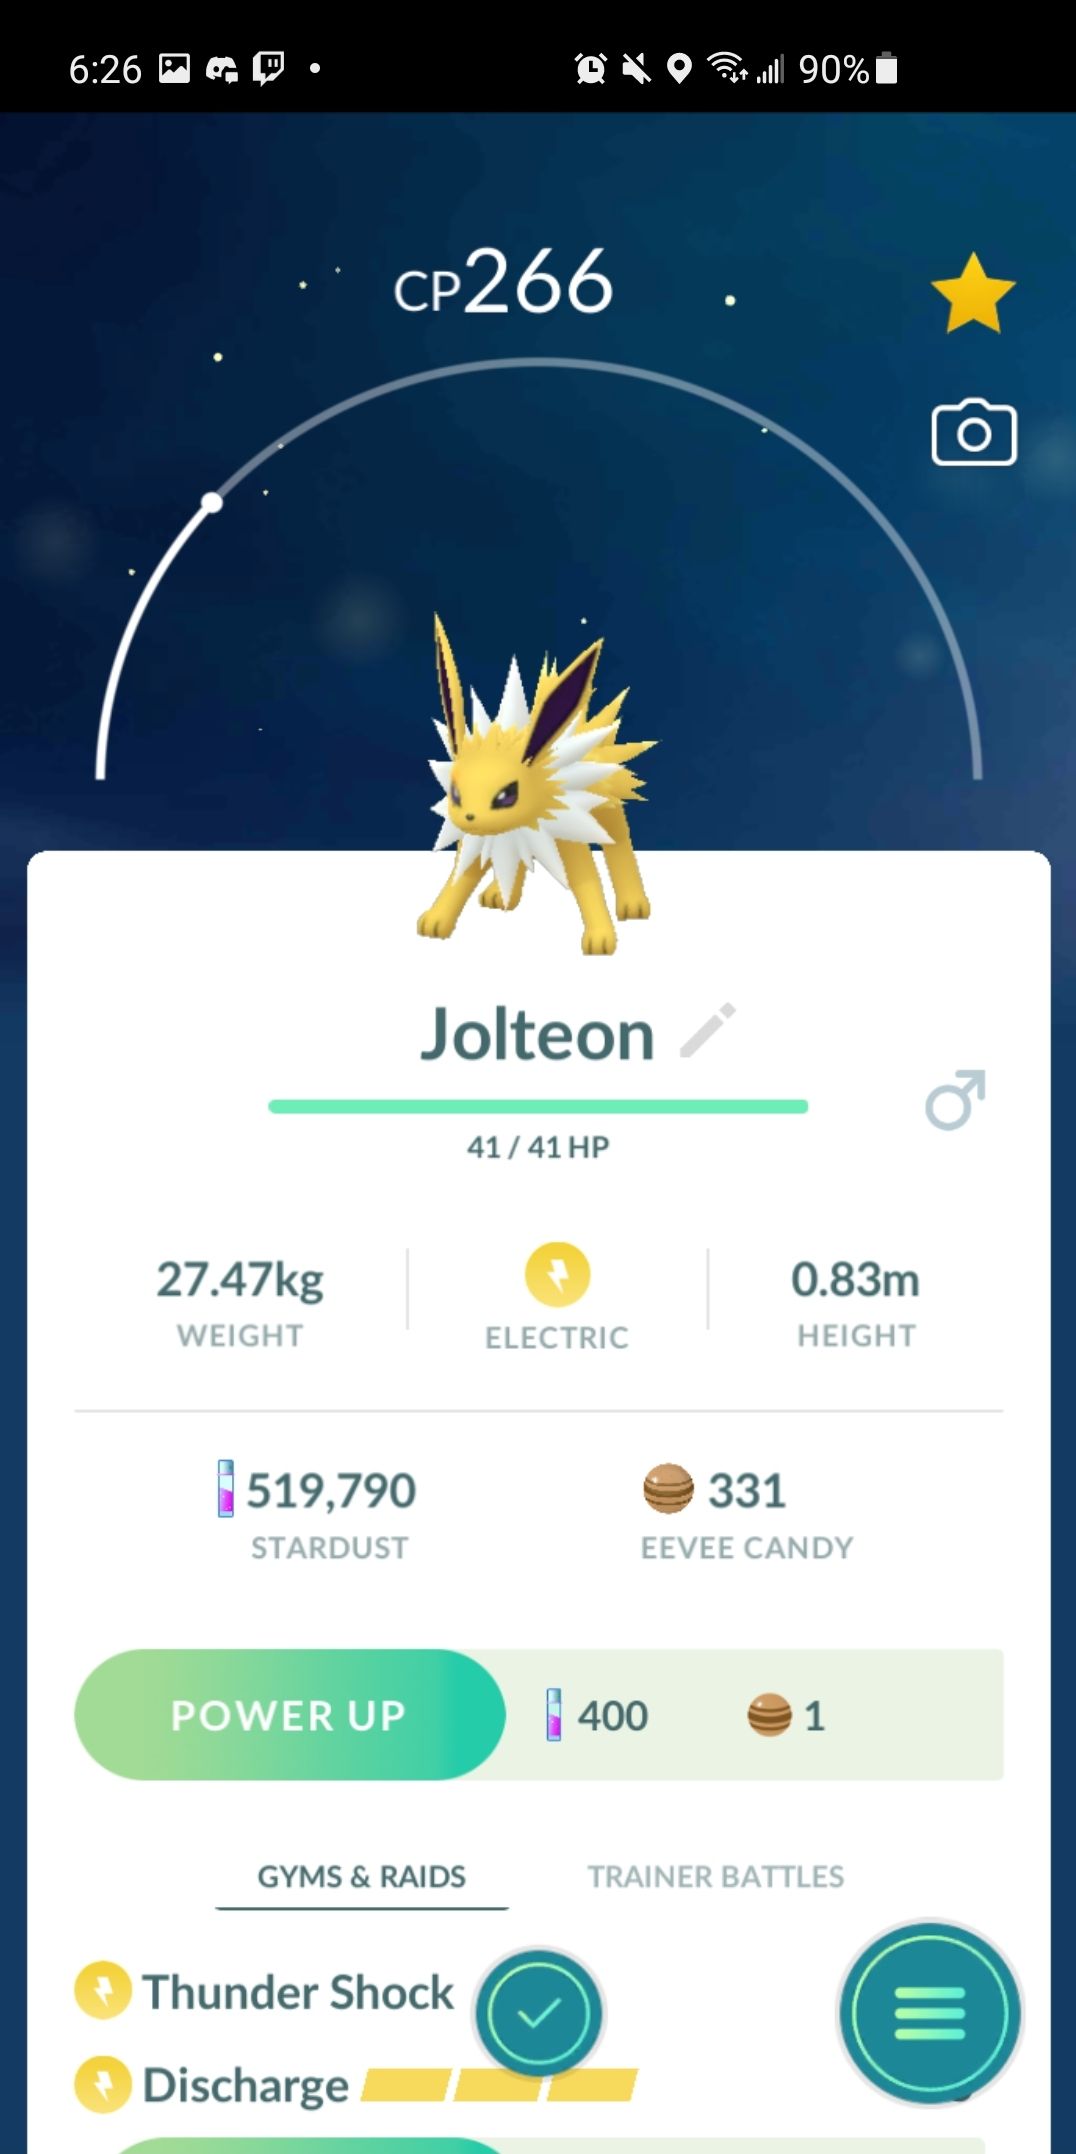 jolteon pokemon go stat page with star filled in top right